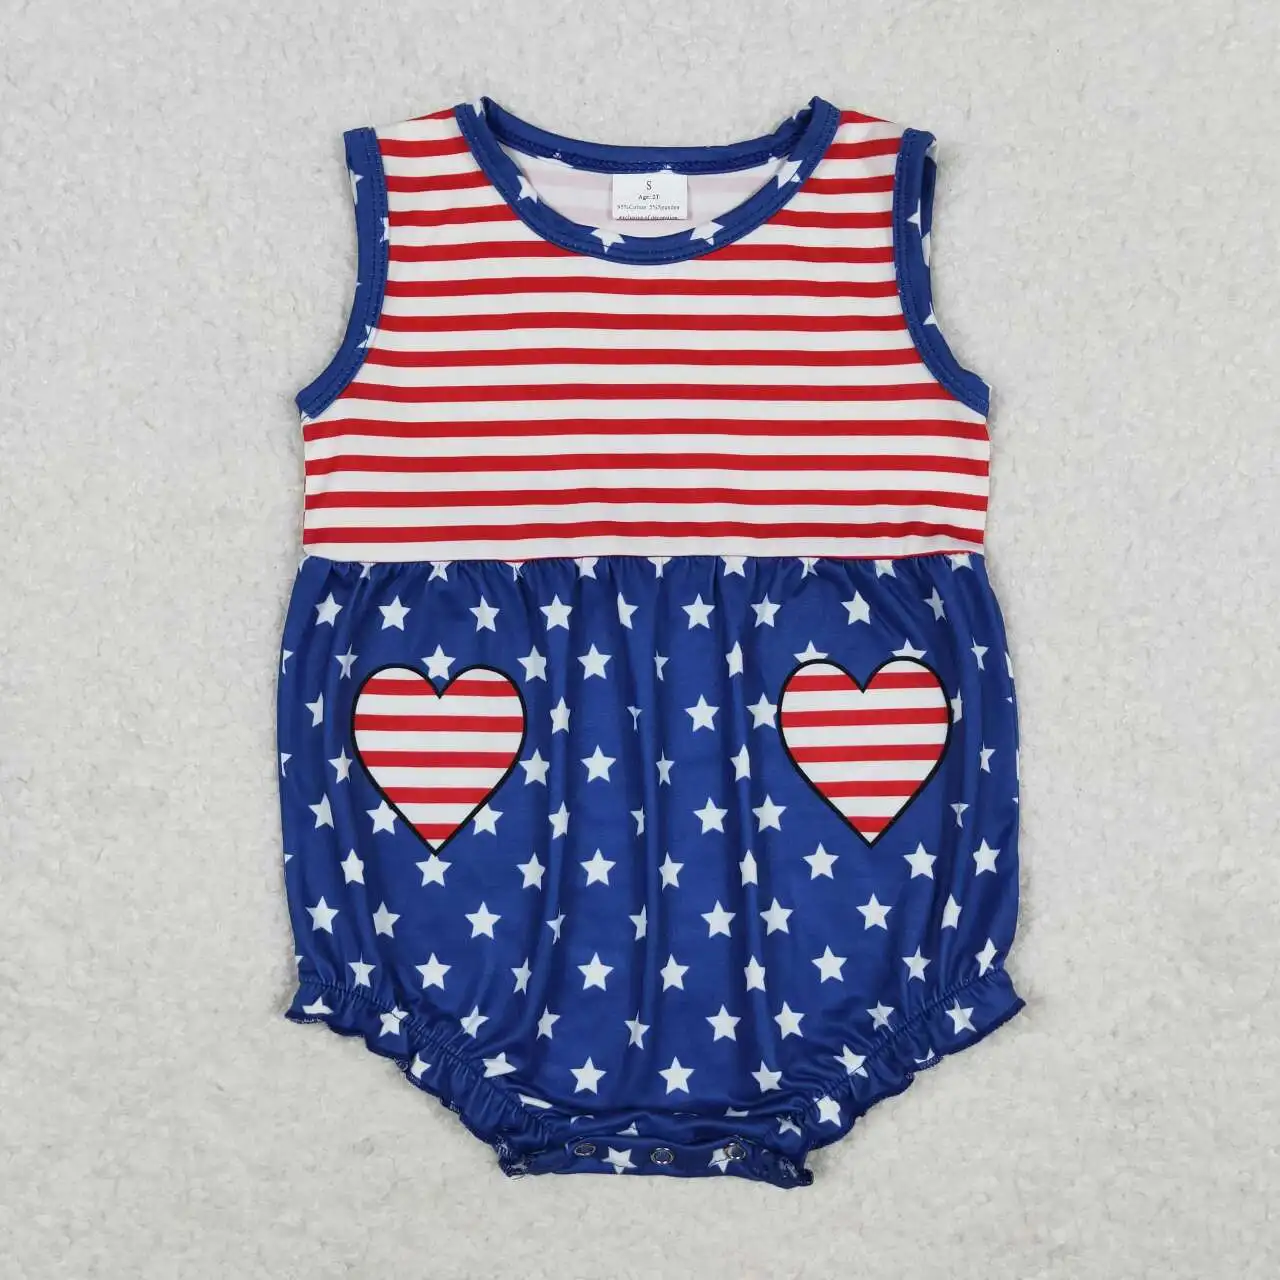 

Infant girls blue stars Rompers Clothing Newborn boutique wholesale baby kids cute bubble Sleeveless summer onesie hot sale